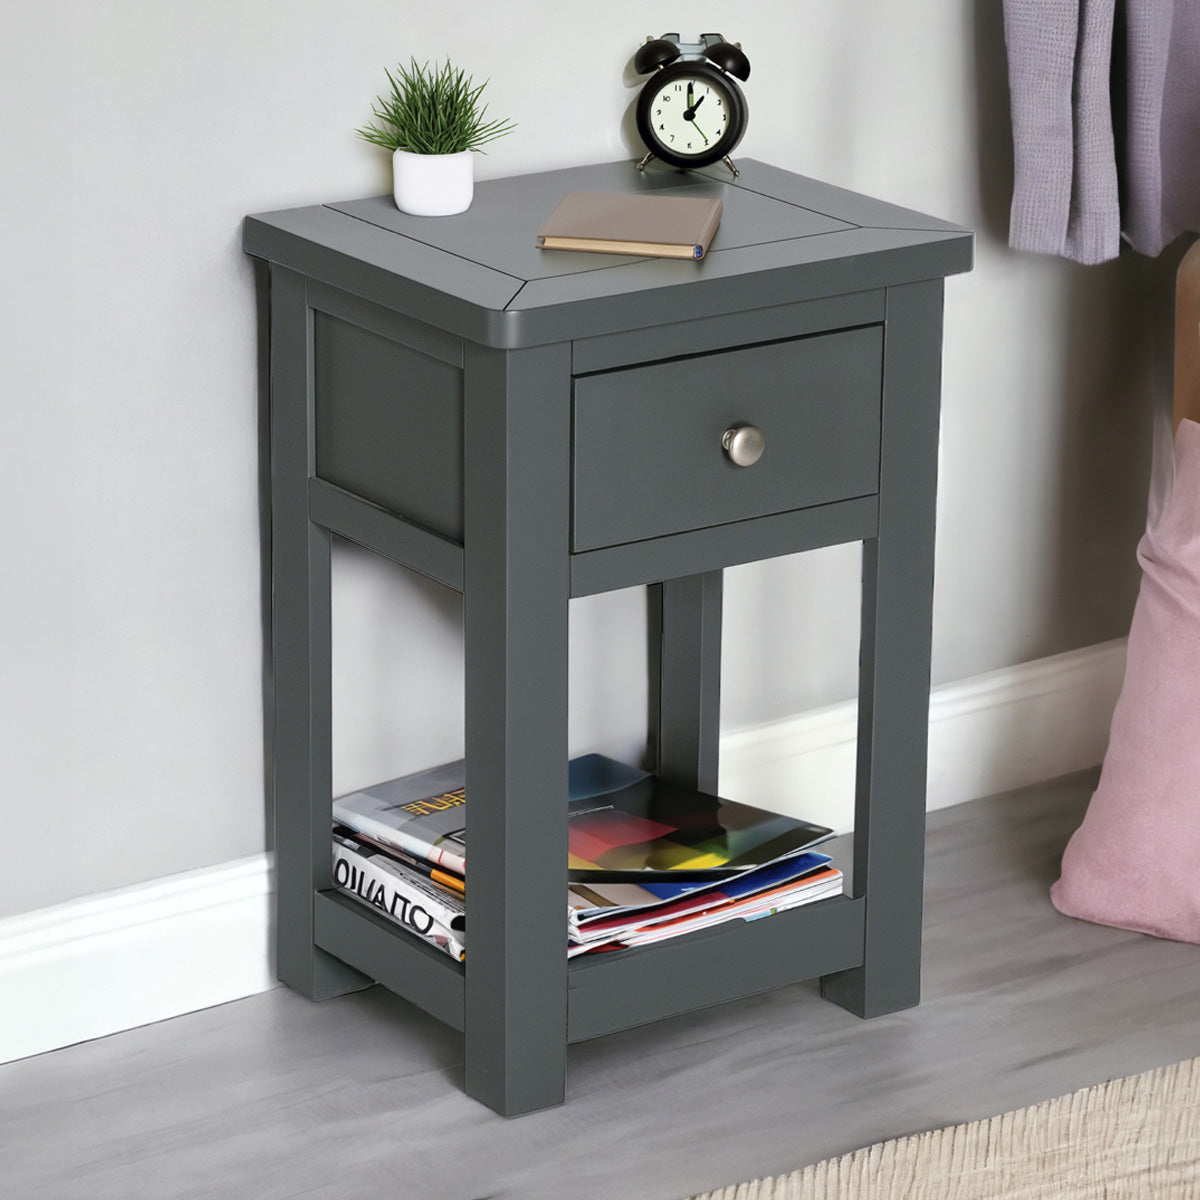 Manor Charcoal 1 Drawer Bedside Table